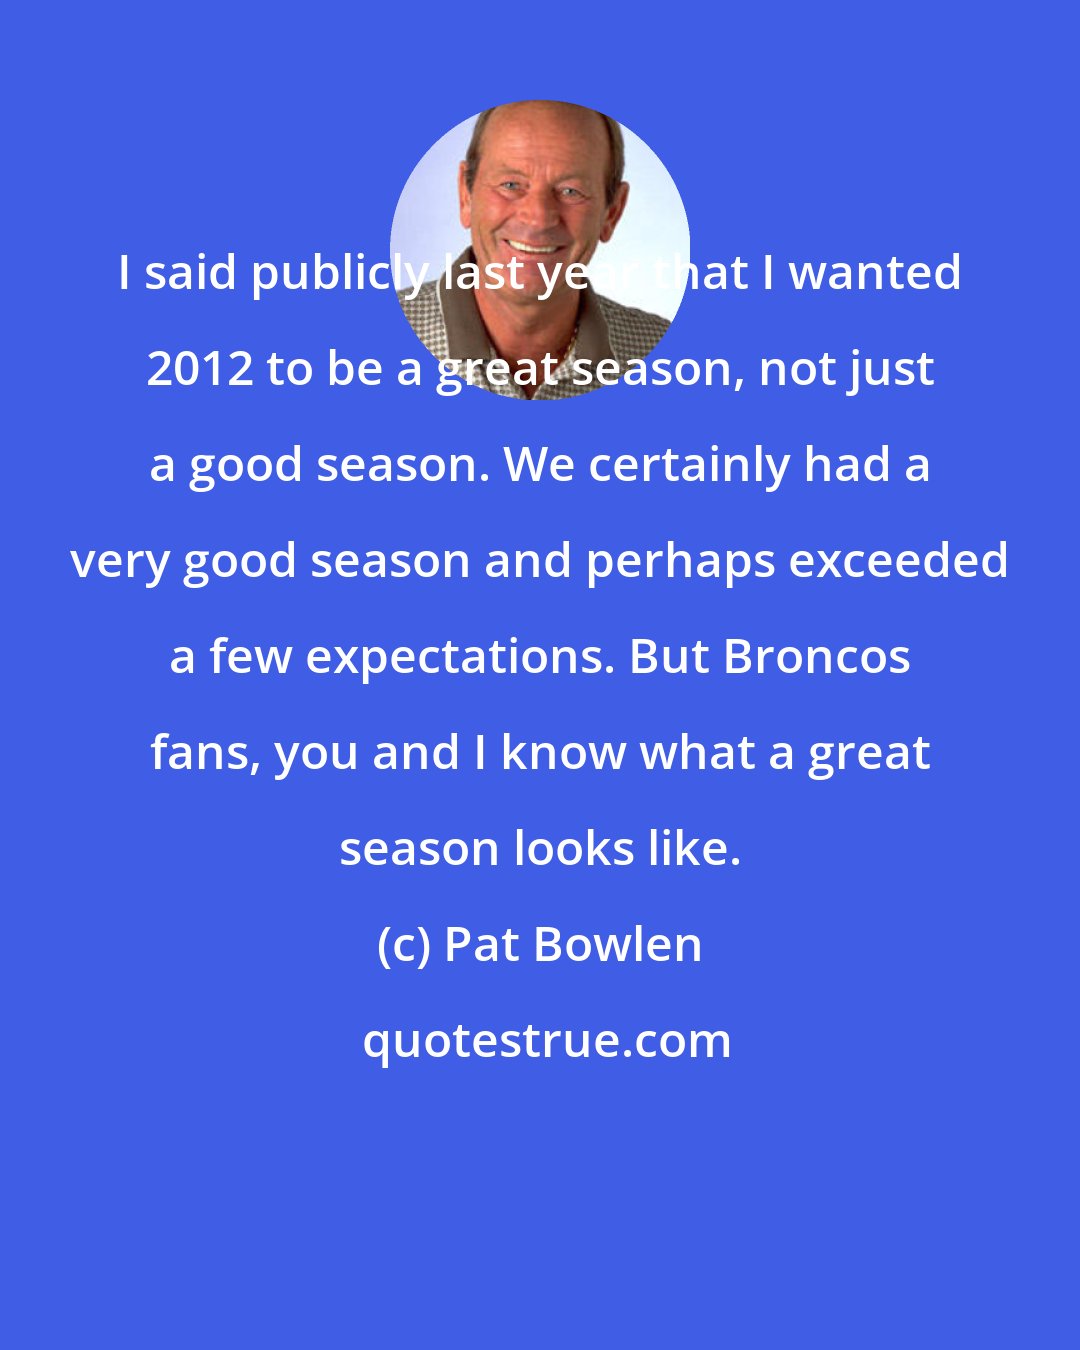 Pat Bowlen: I said publicly last year that I wanted 2012 to be a great season, not just a good season. We certainly had a very good season and perhaps exceeded a few expectations. But Broncos fans, you and I know what a great season looks like.